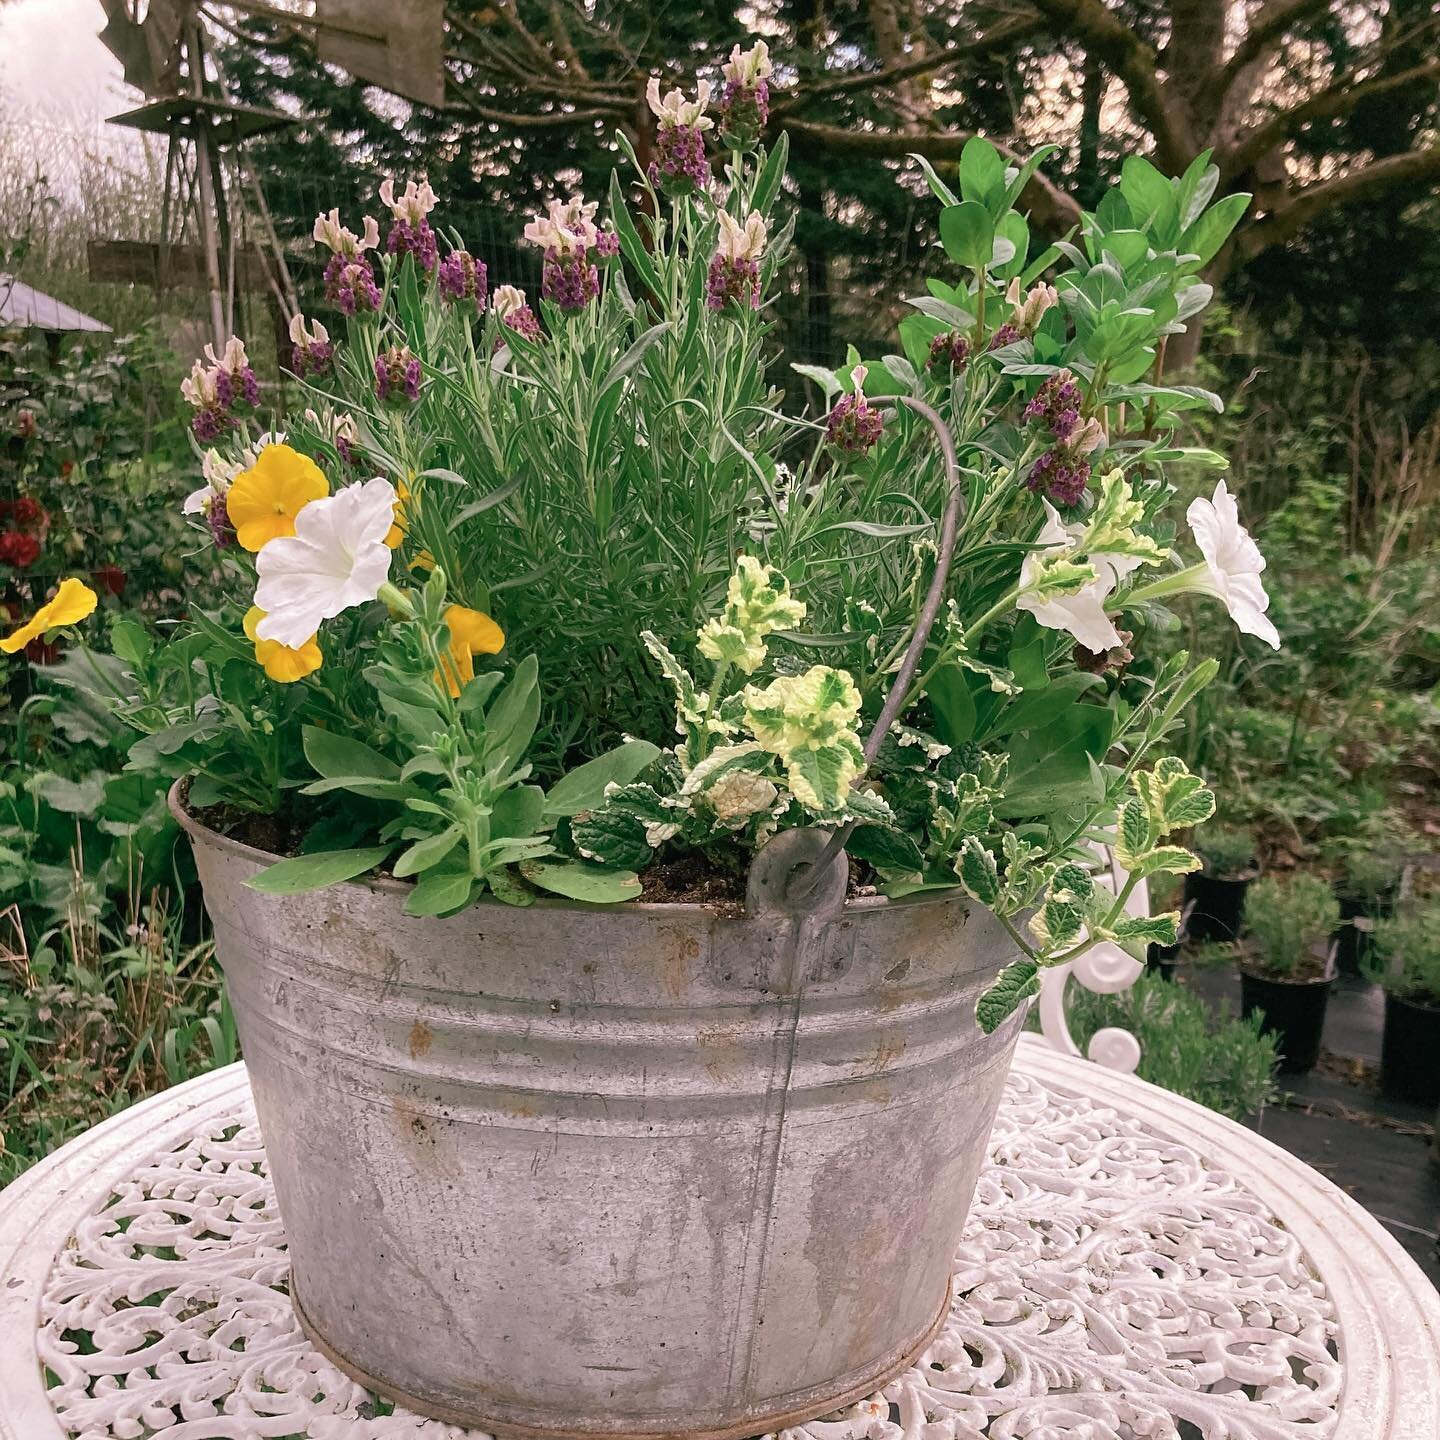 Just a gorgeous sample of our vintage galvanized buckets filled with oodles of botany! We love flower container gardens!
Find these and much more at the Camas Plant &amp; Garden Fair!
🌼This Saturday, May 13
🌿9am-4pm
🌸Downtown Camas
#lacamaslavende